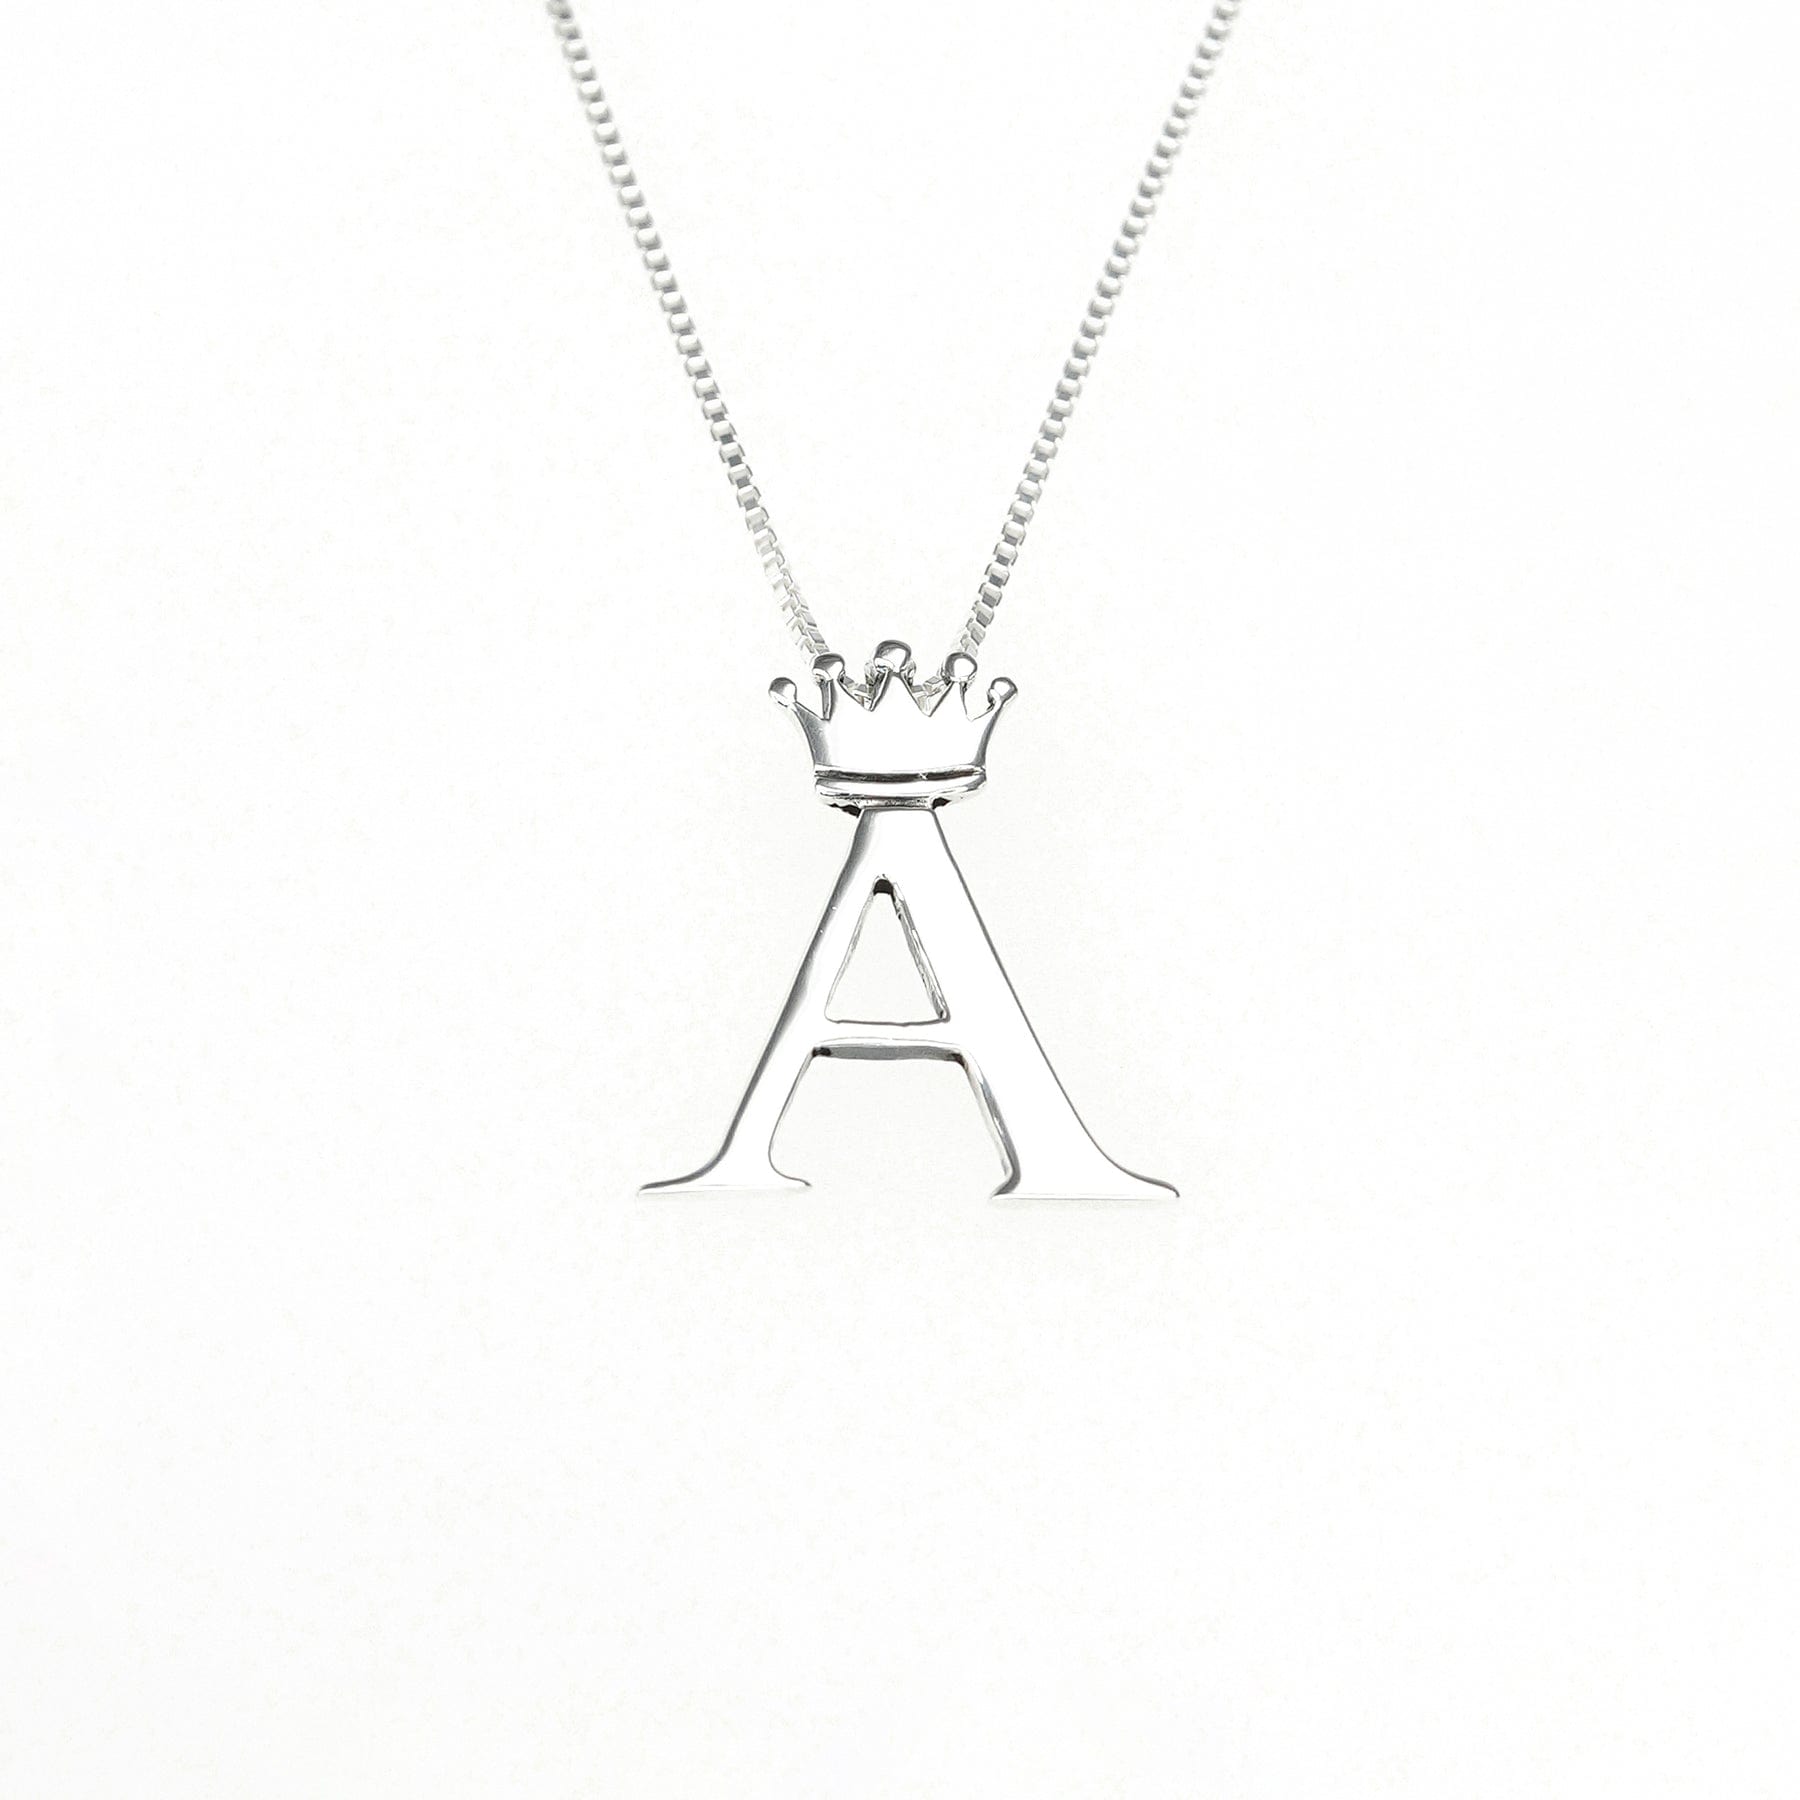 Cristy Cali Royal Initial Charm Sterling Silver 